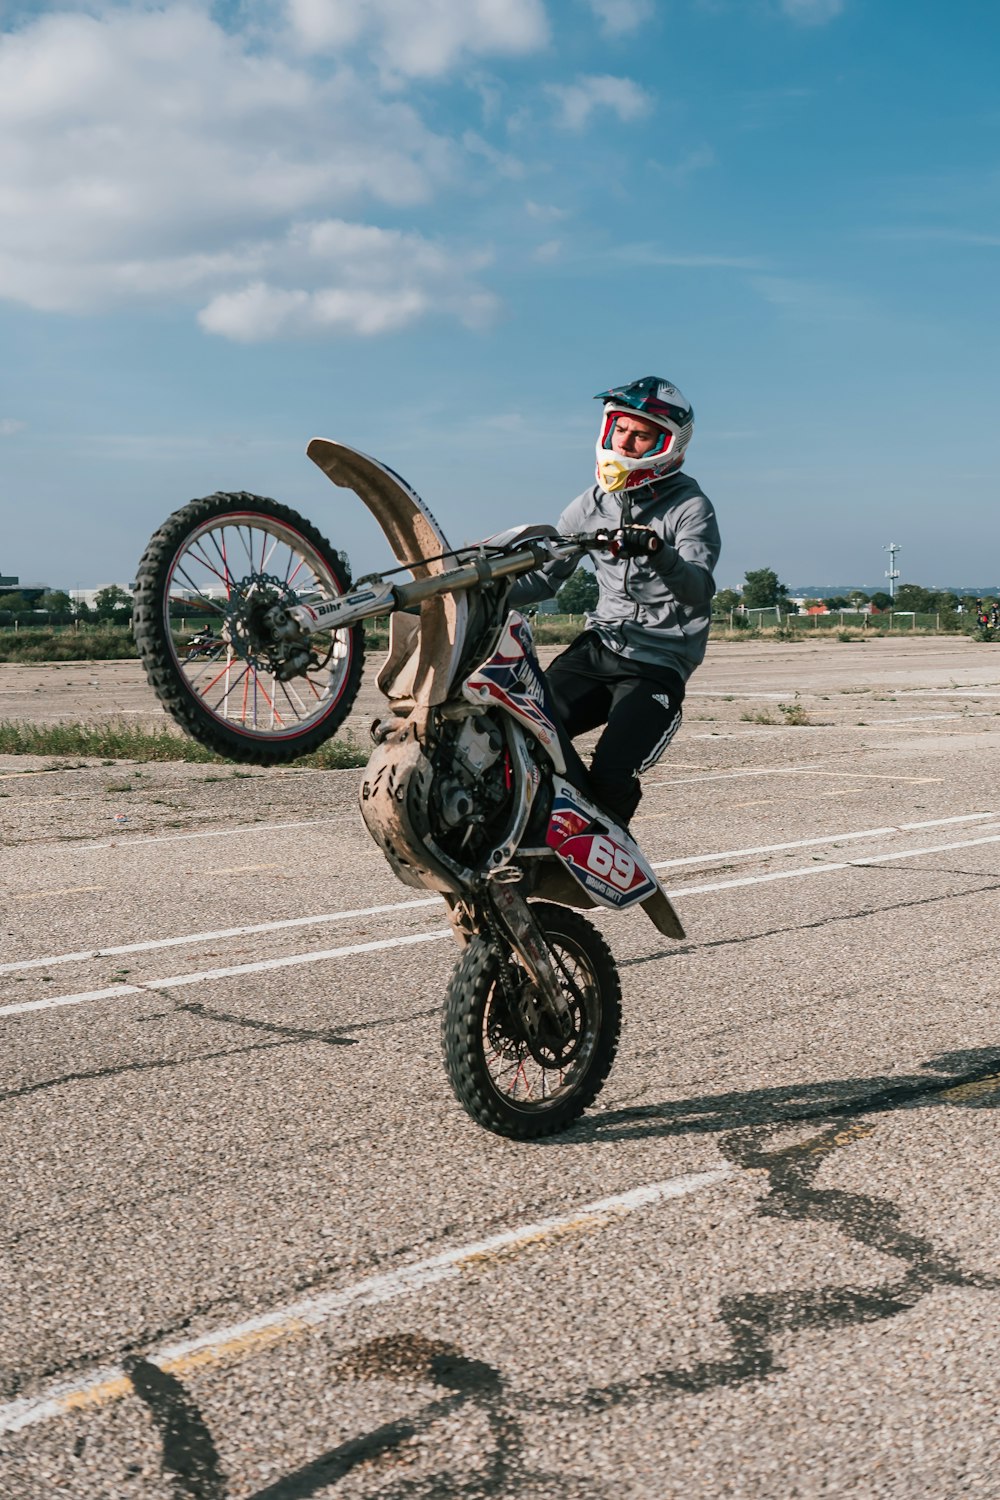 a person on a dirt bike doing a trick